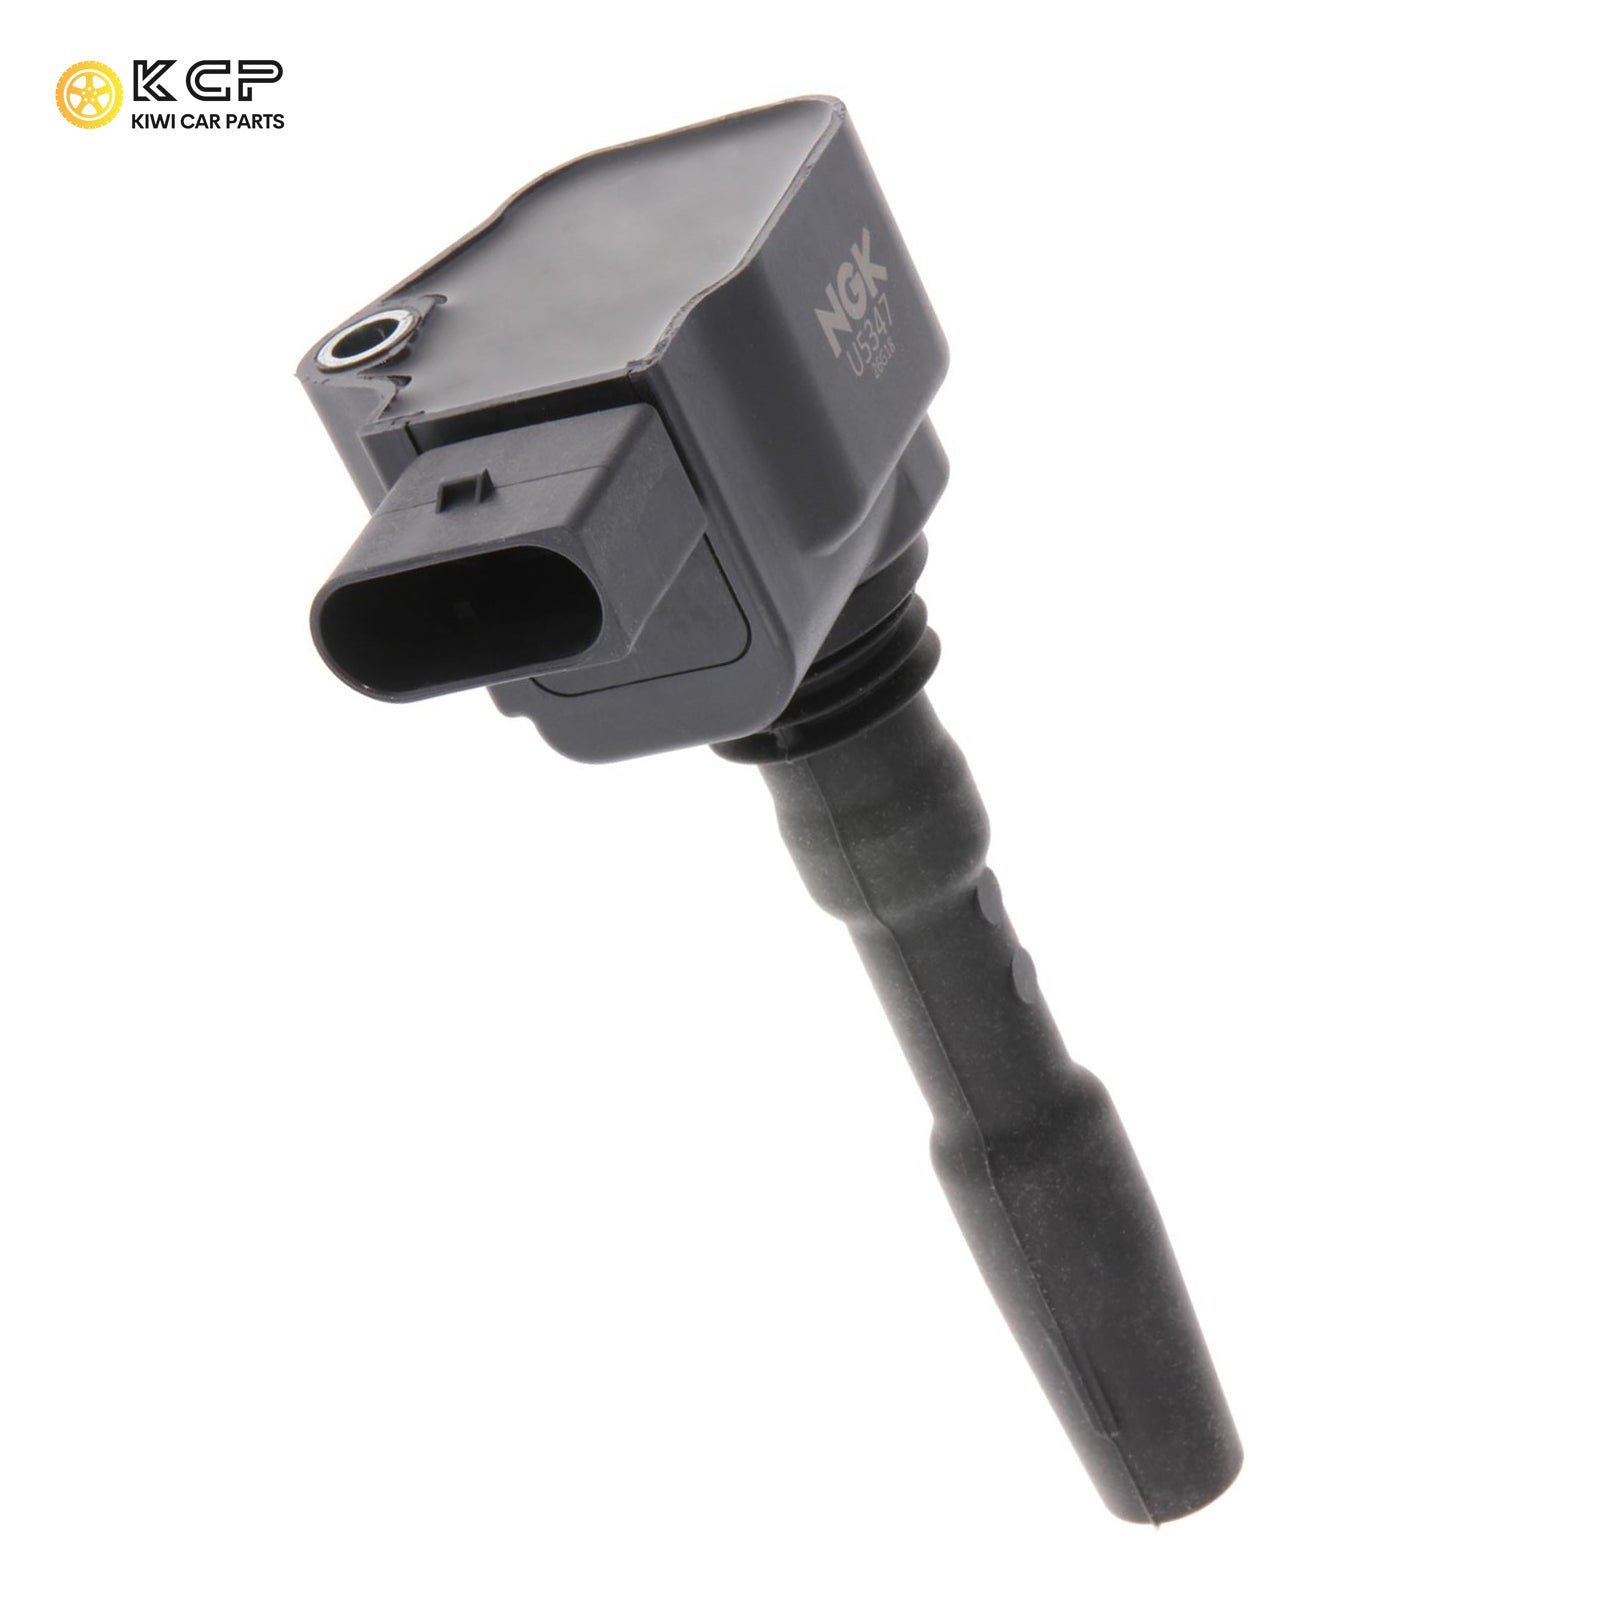 NGK U5347 49115 Ignition Coil Suitable For 2015 - 2018 Audi RS7 Base, RS7 Performance, S8 Plus, S8 Base, 2013 - 2018 Bently Car Ignition Coils